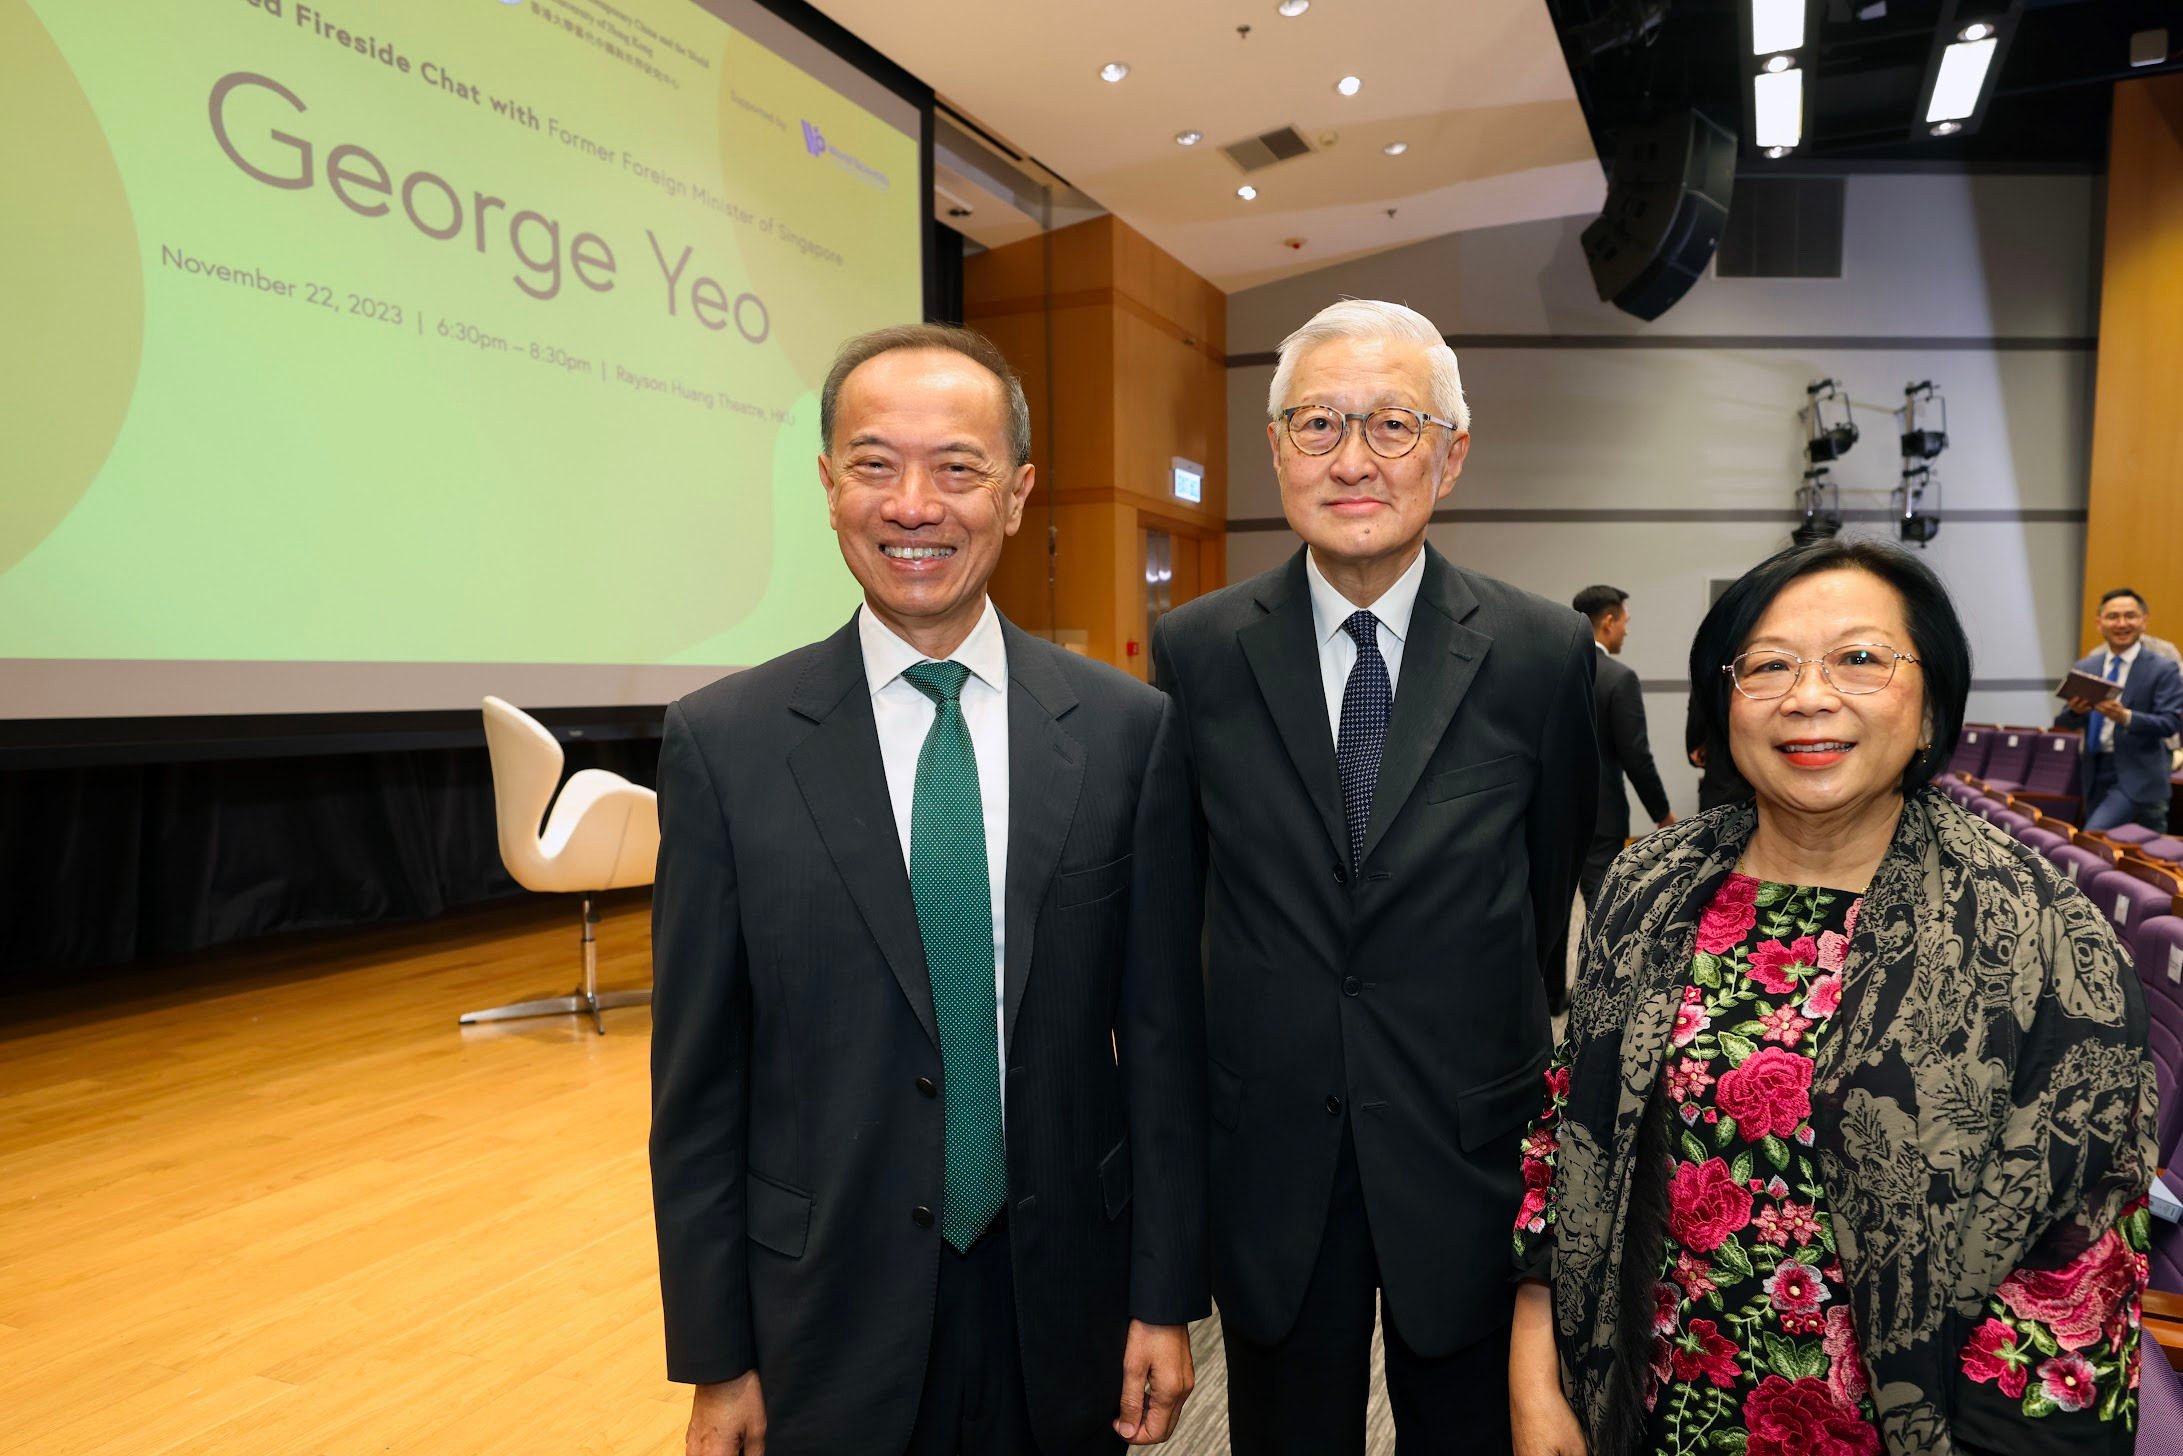 Yeo with his wife, Jennifer Yeo, and former Chief Justice Andrew Li Kwok-nang (middle), who delivered the opening address. Photo: Handout/HKU